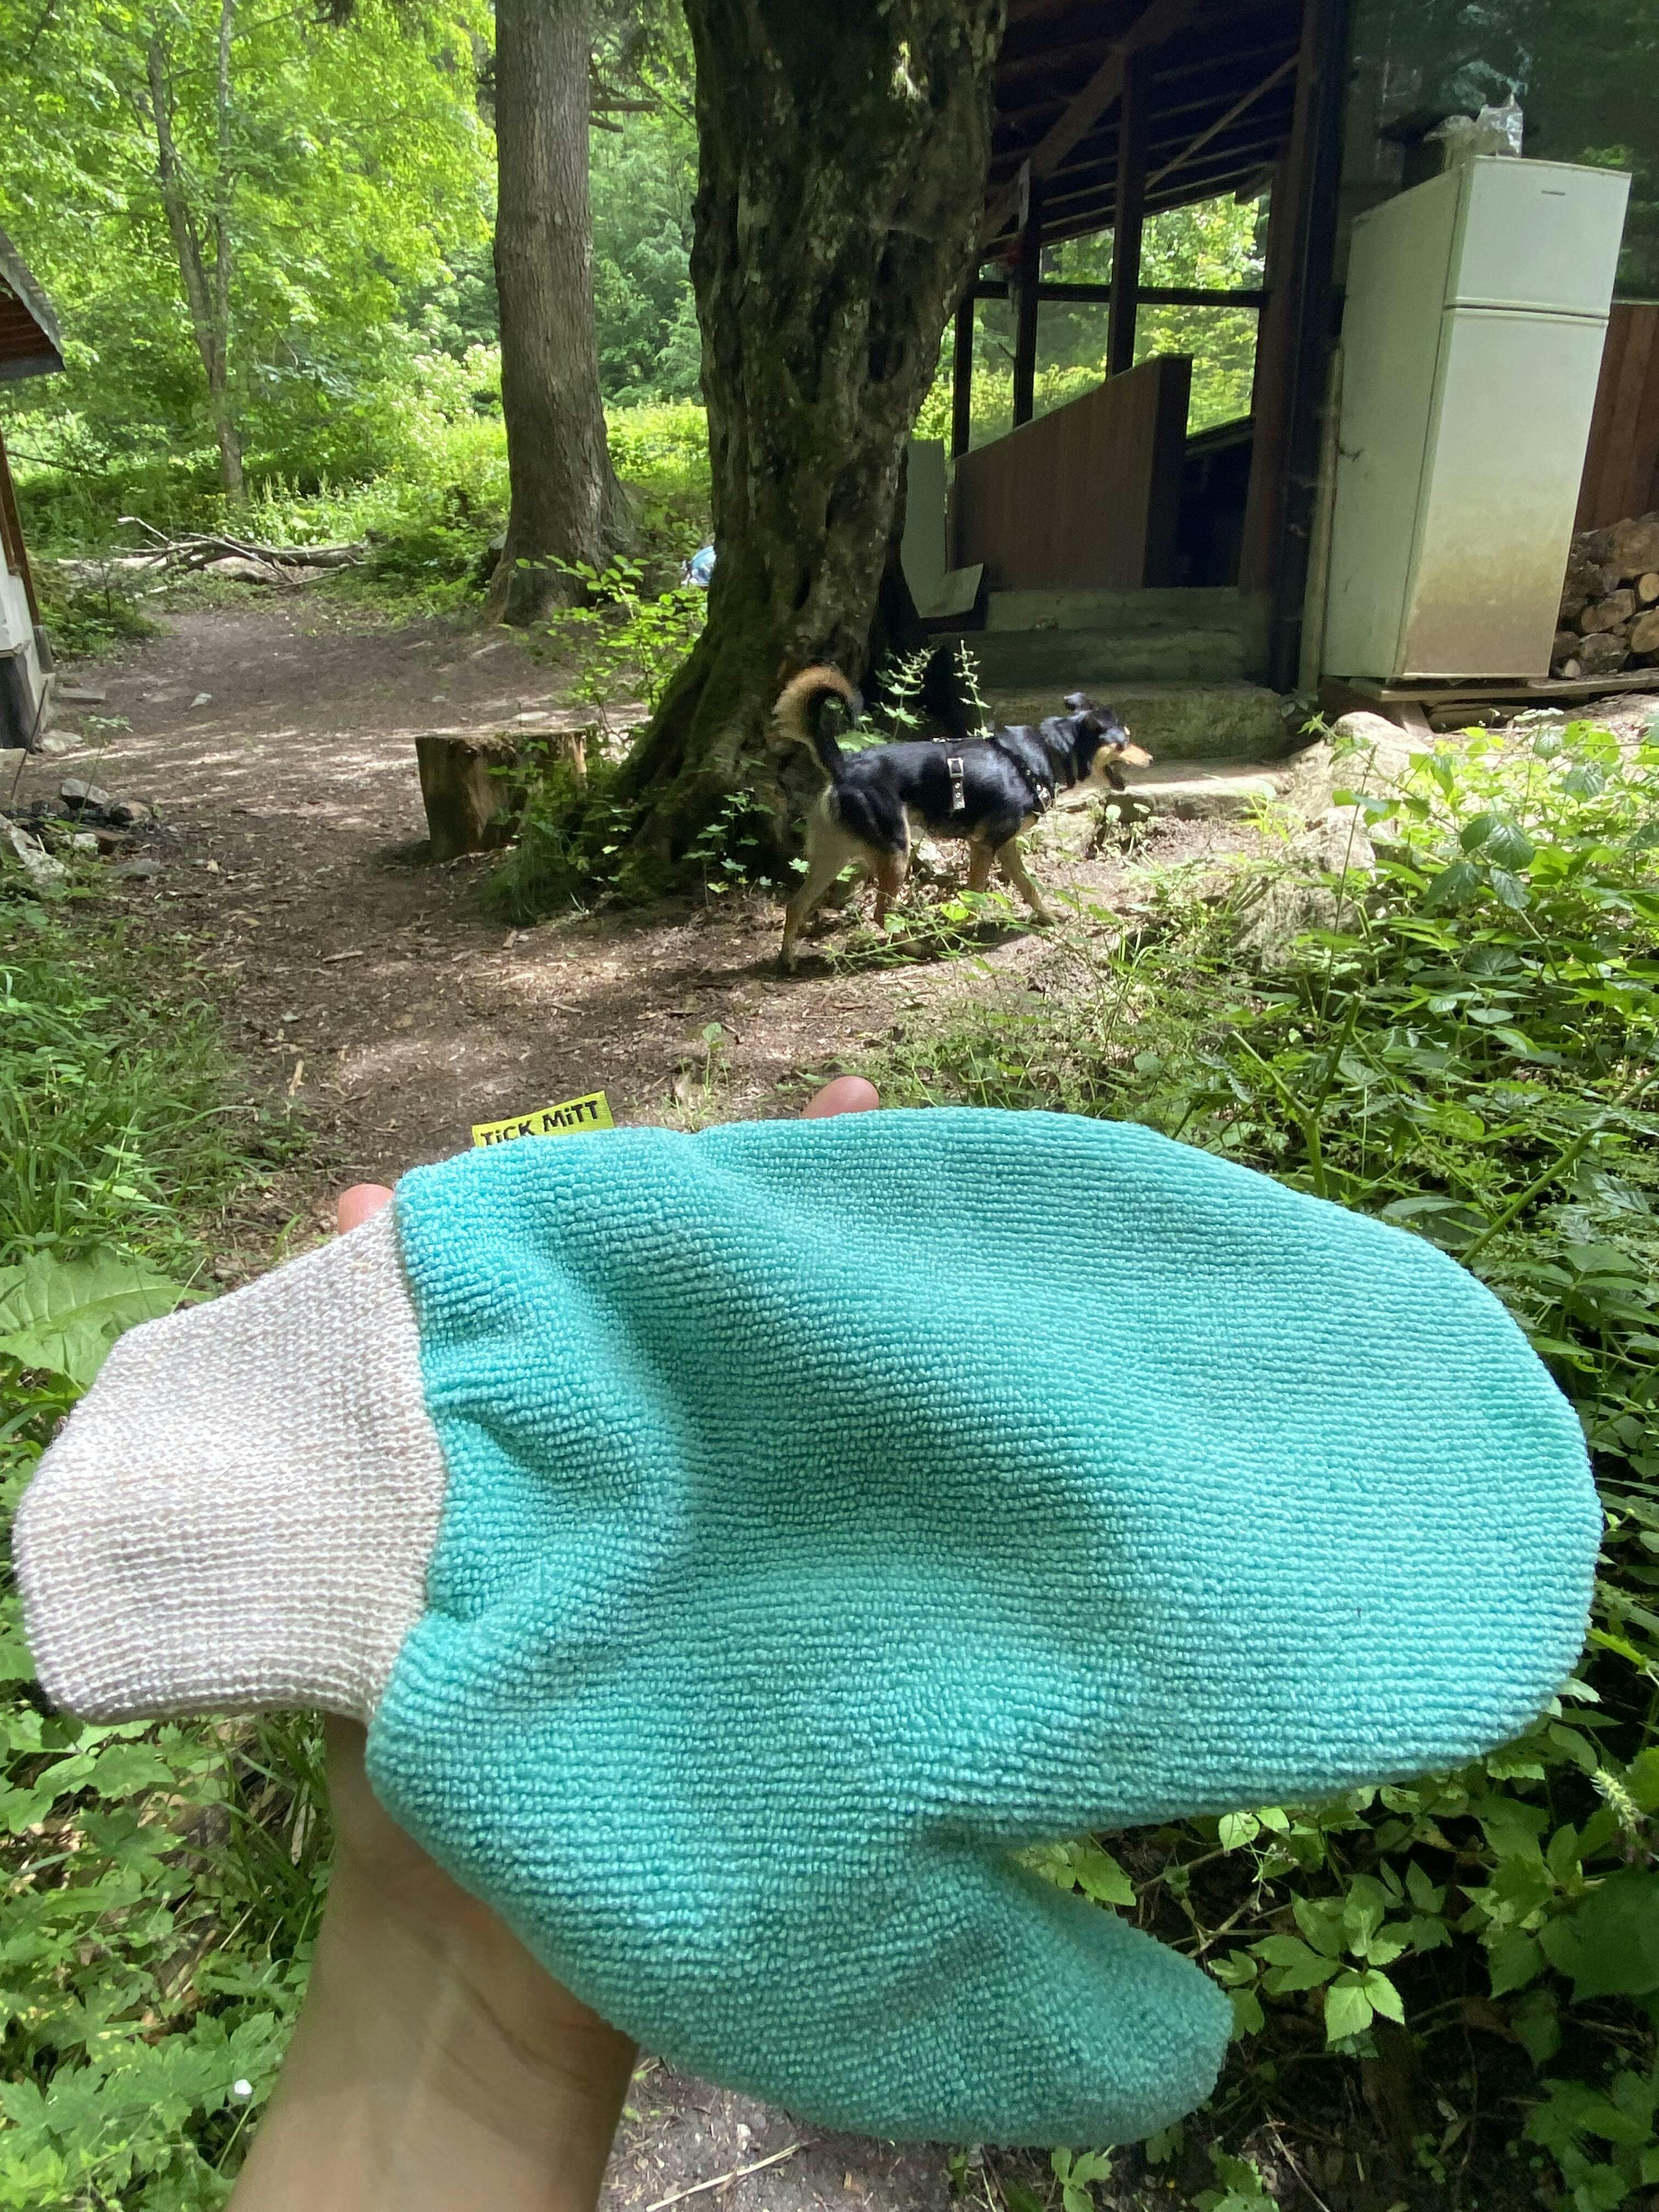 Person holding a large green cleaning mitt, with a dog walking on a forest path in the background.